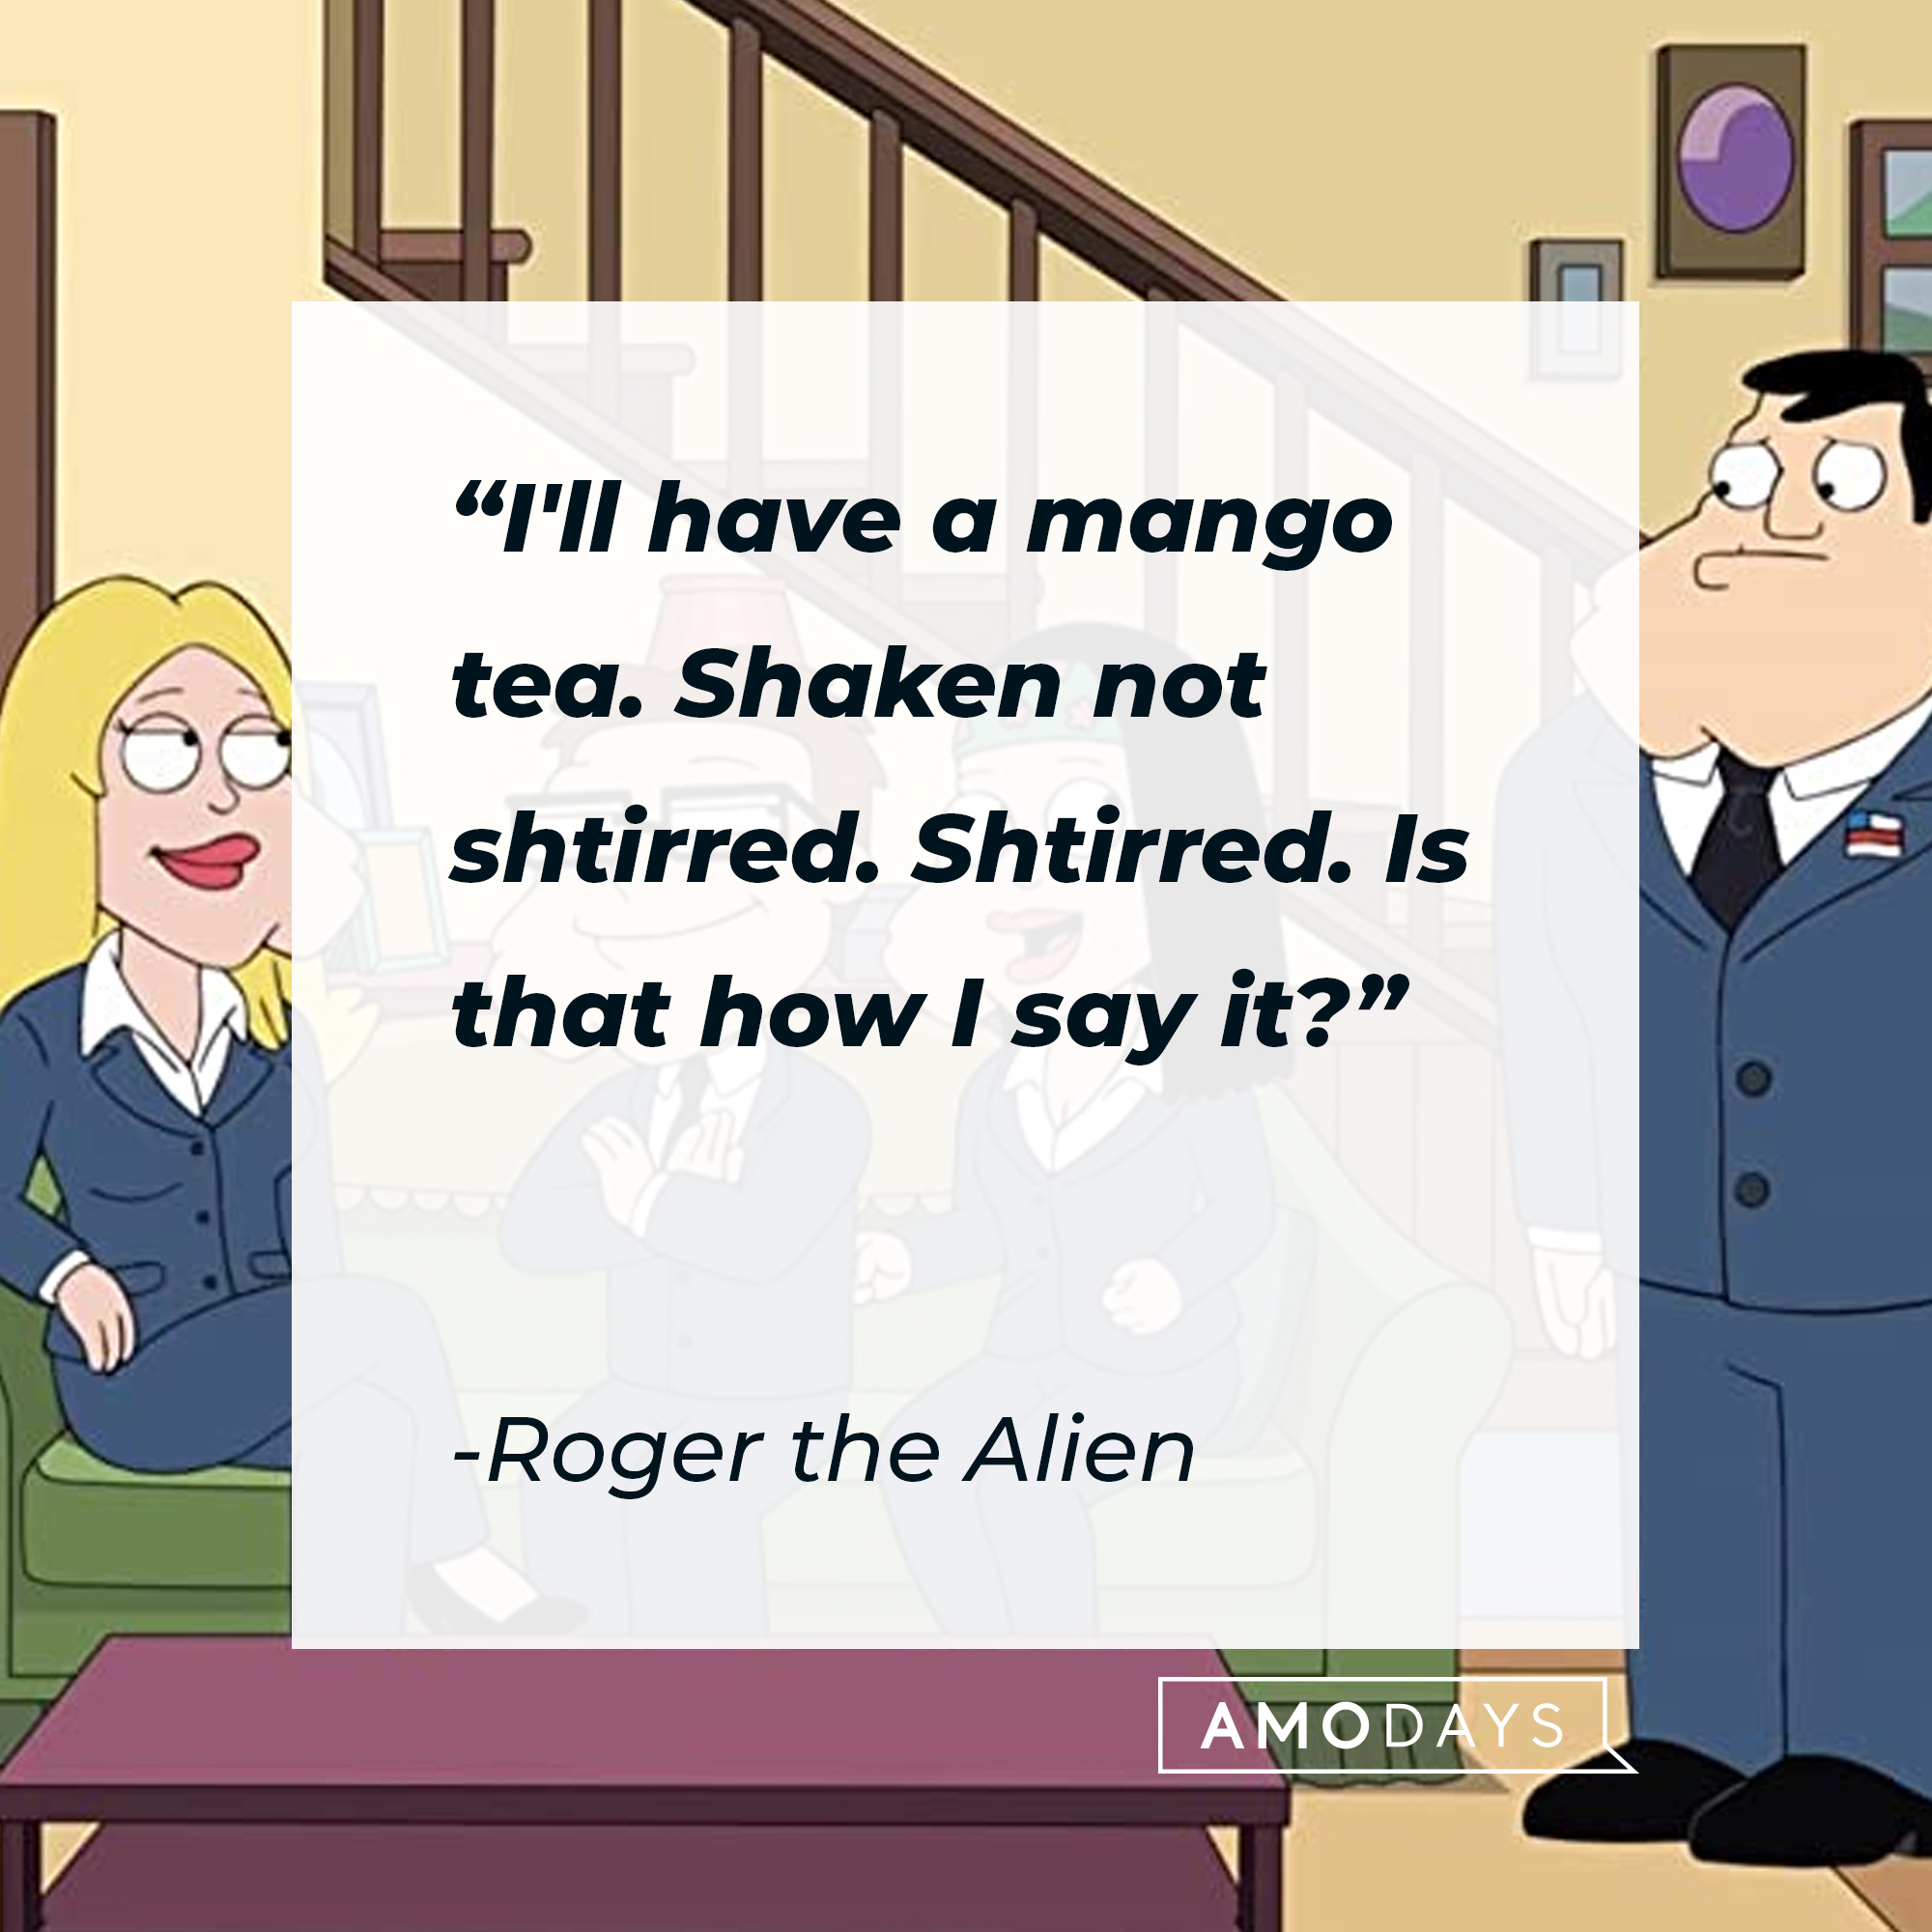 Roger the Alien's quote:"I'll have a mango tea. Shaken not shtirred. Shtirred. Is that how I say it?" | Source: facebook.com/AmericanDad